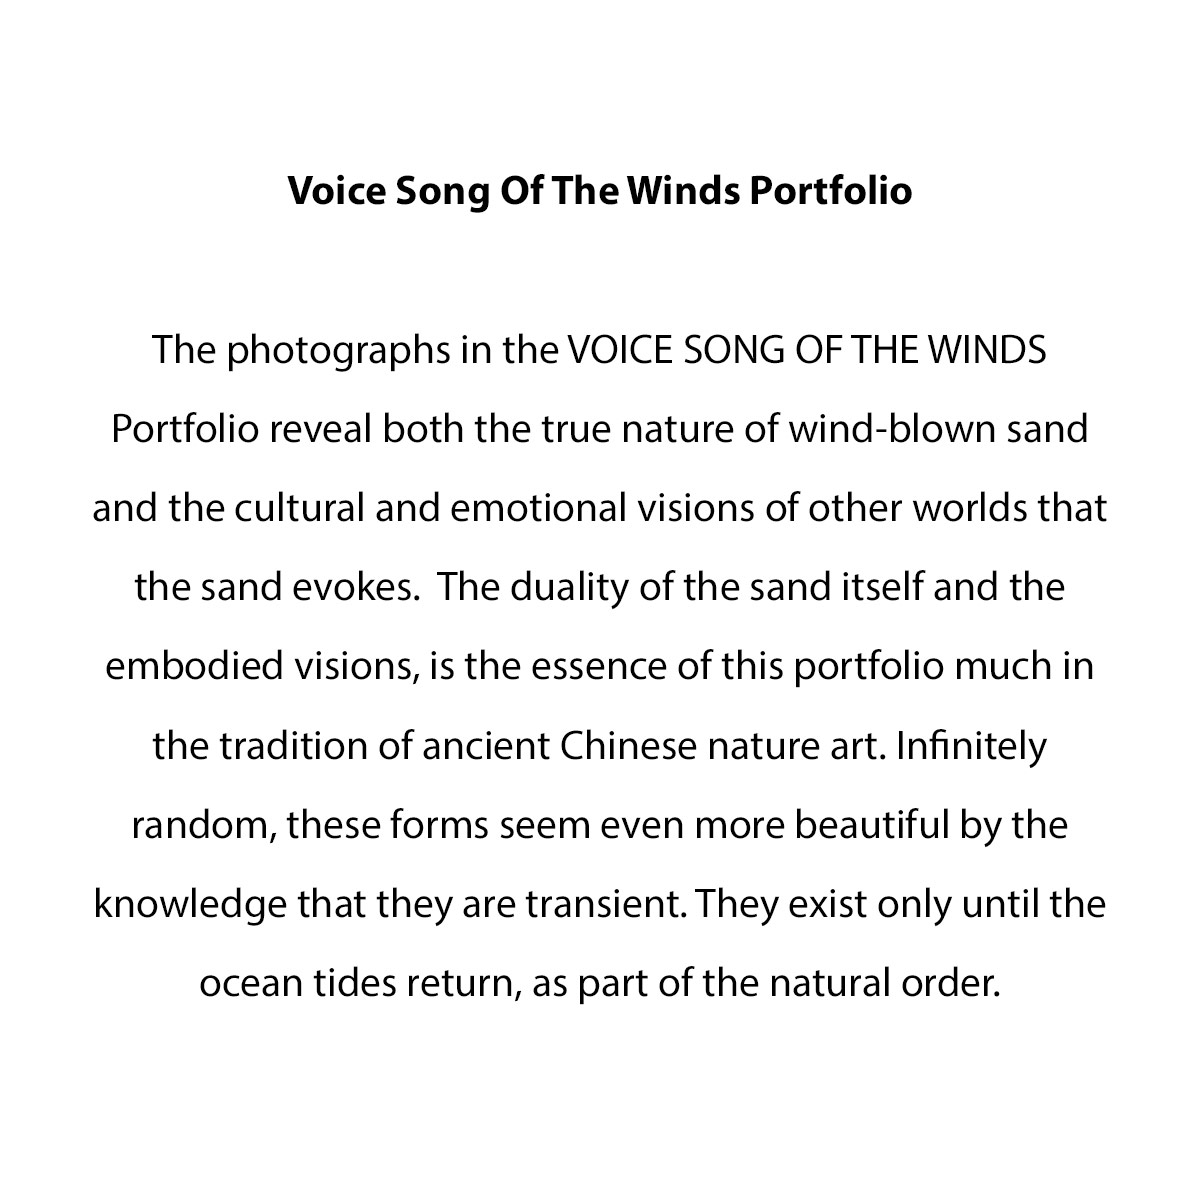 Voice-Song-of-the-Winds-Statement